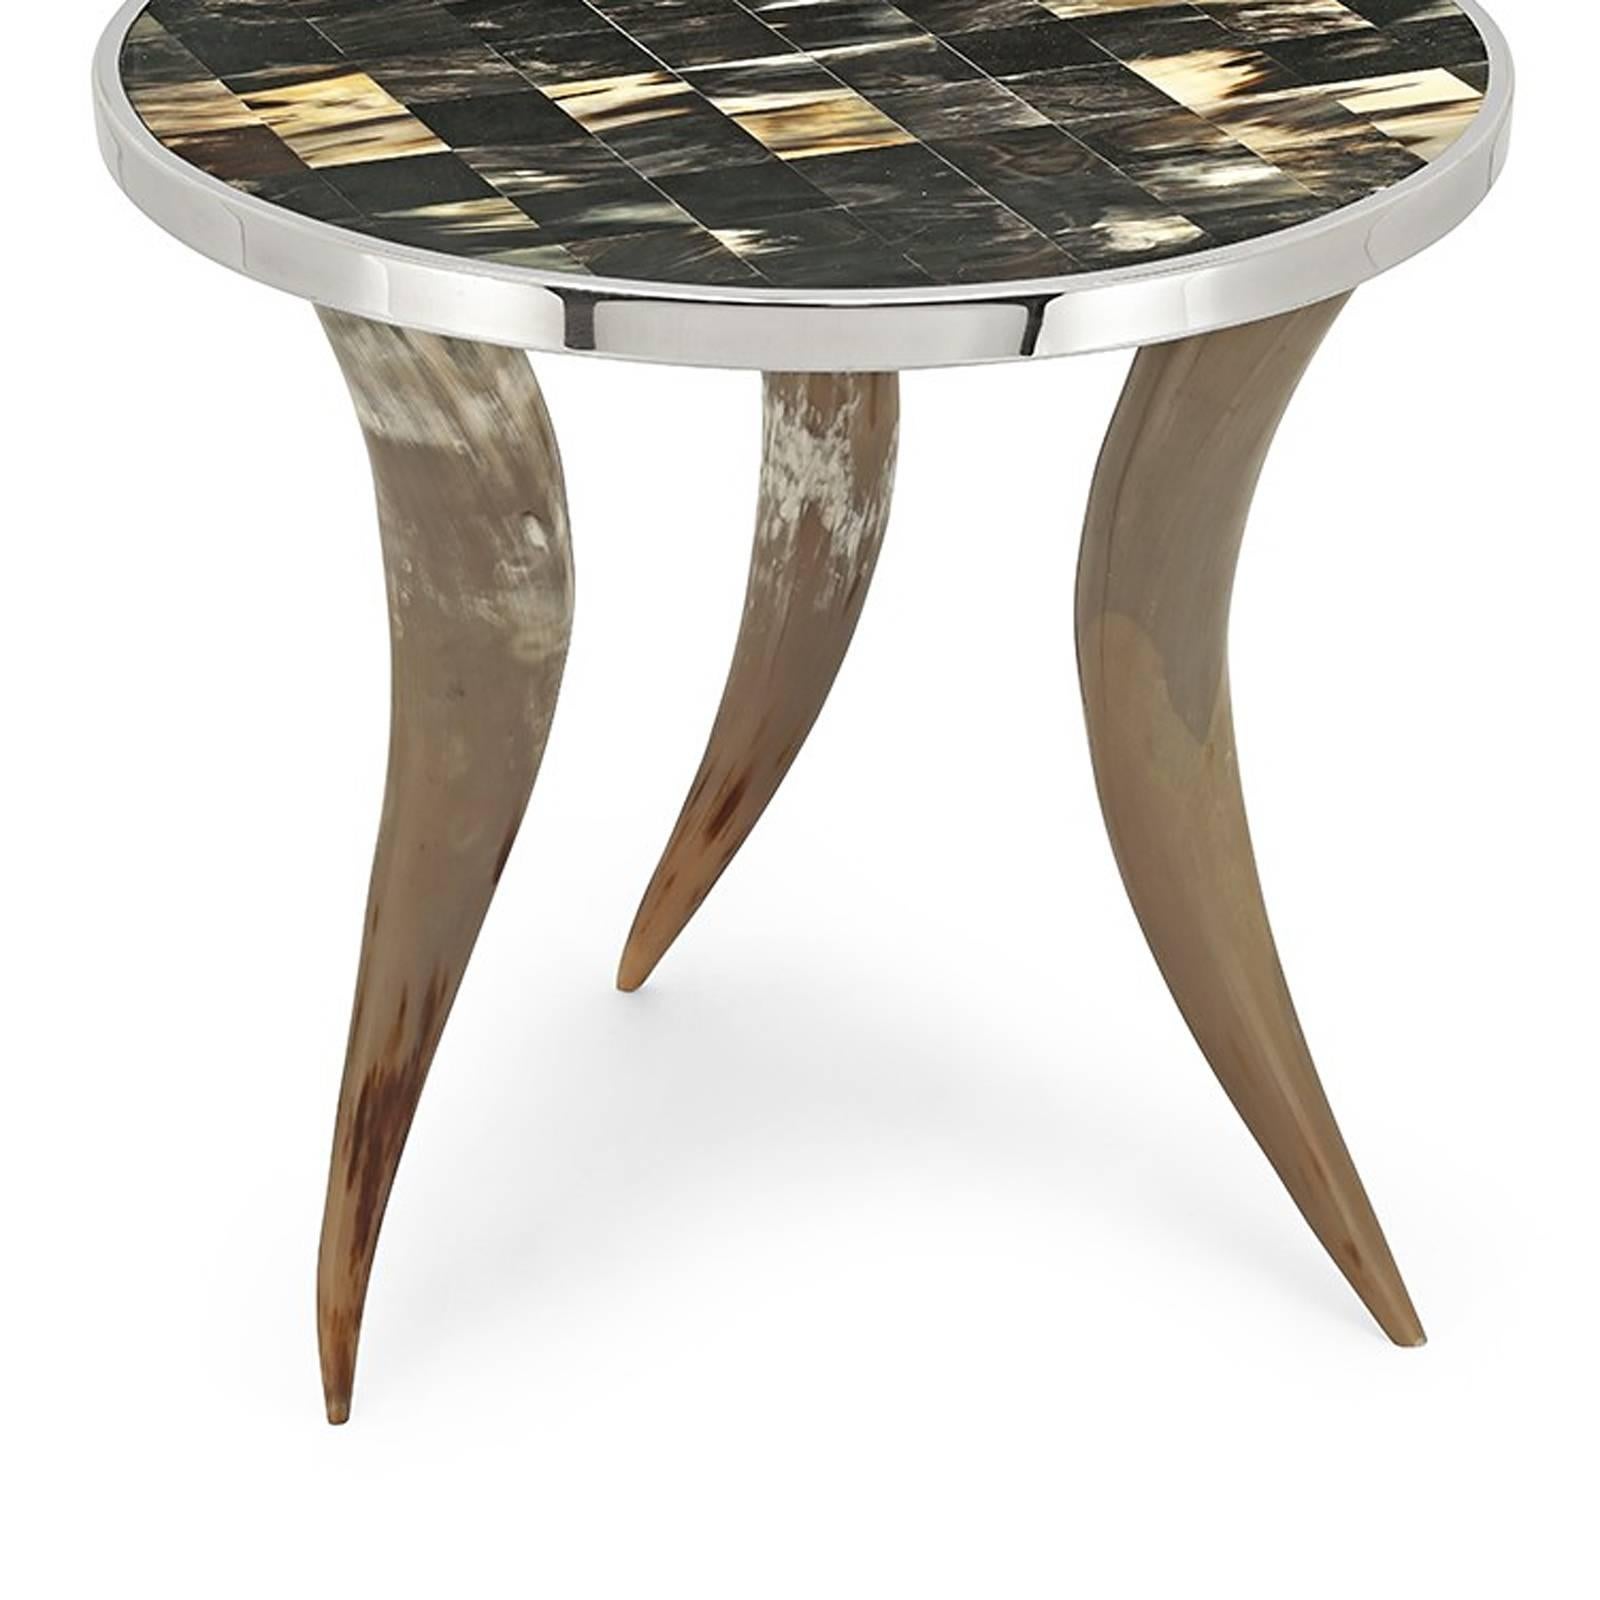 Side tables bones and horns “L” with three horns feet
made with bones. Checkerboard top made with
bones and surrounded with polished stainless steel.
